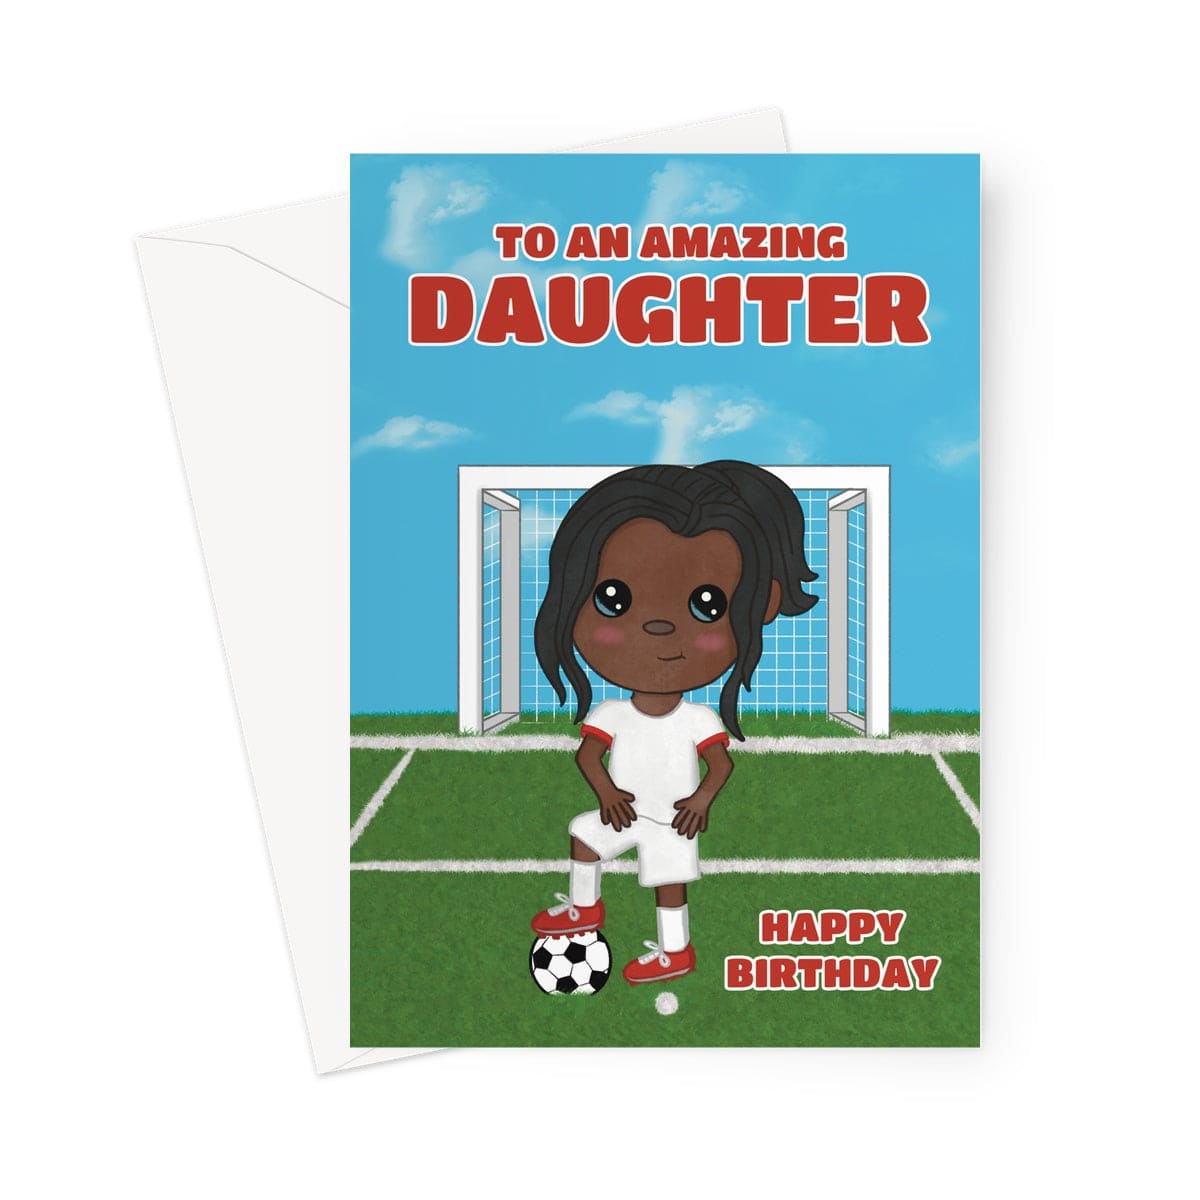 Cute football card for a Daughter who loves the woman's world cup.